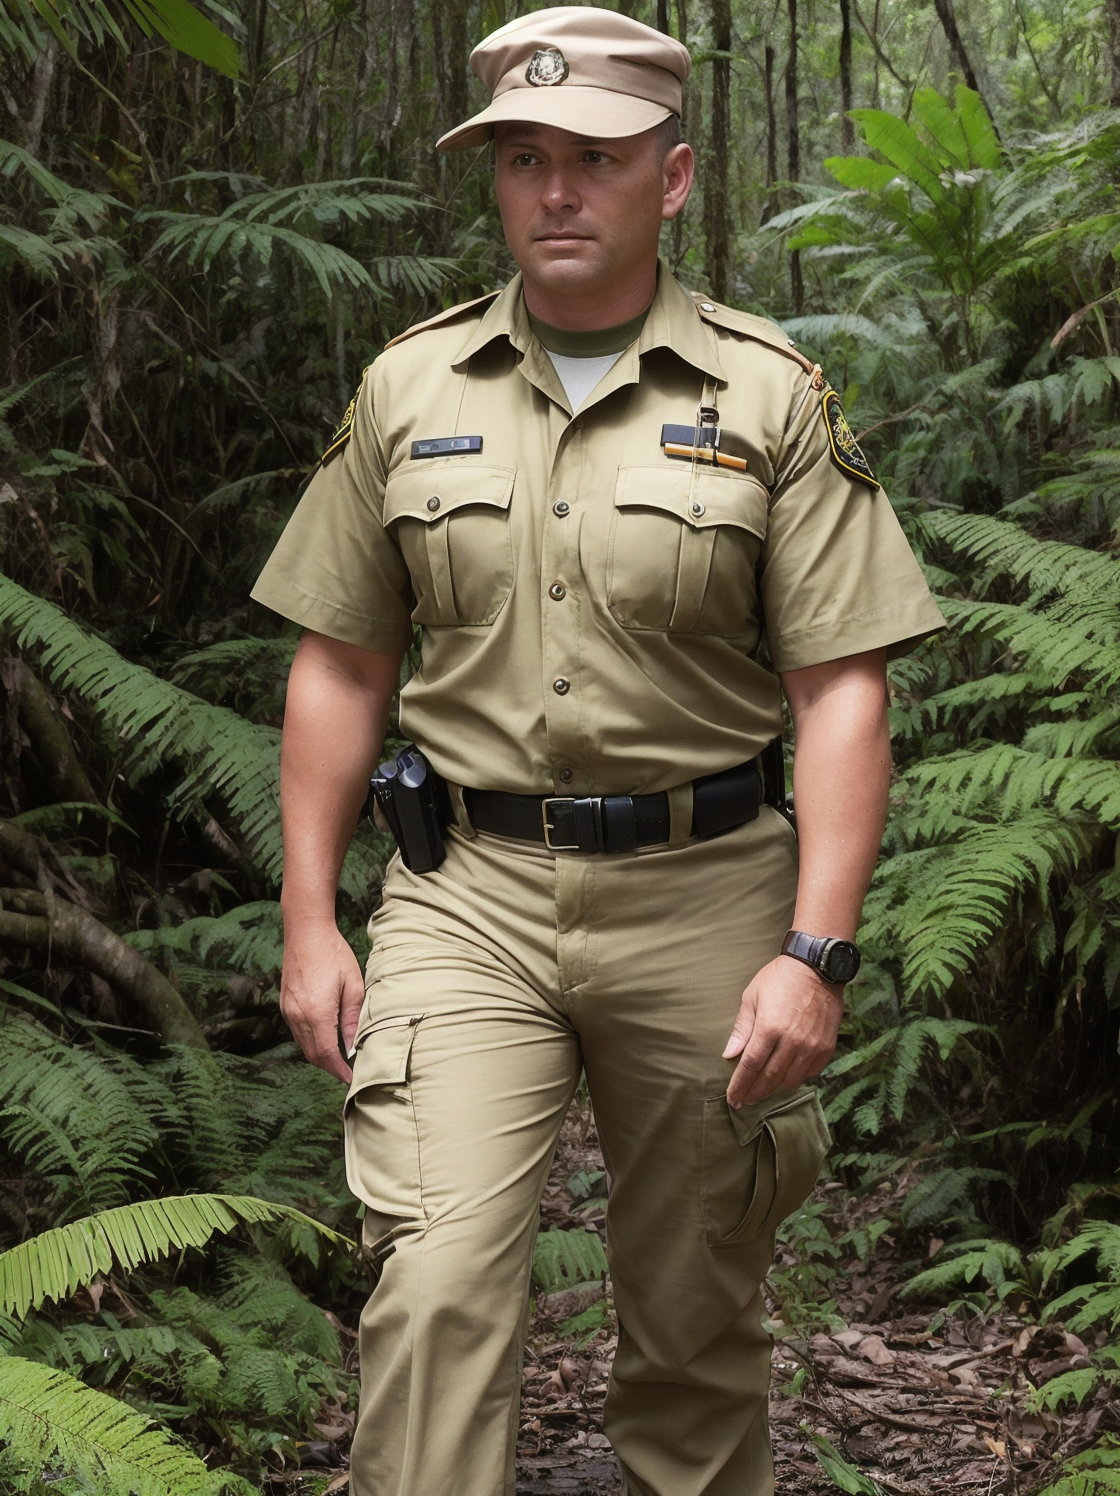 a photograph of a Forest officer in khaki cargo pants and shirt, equipped with a wildlife tracking device, in a tropical r...